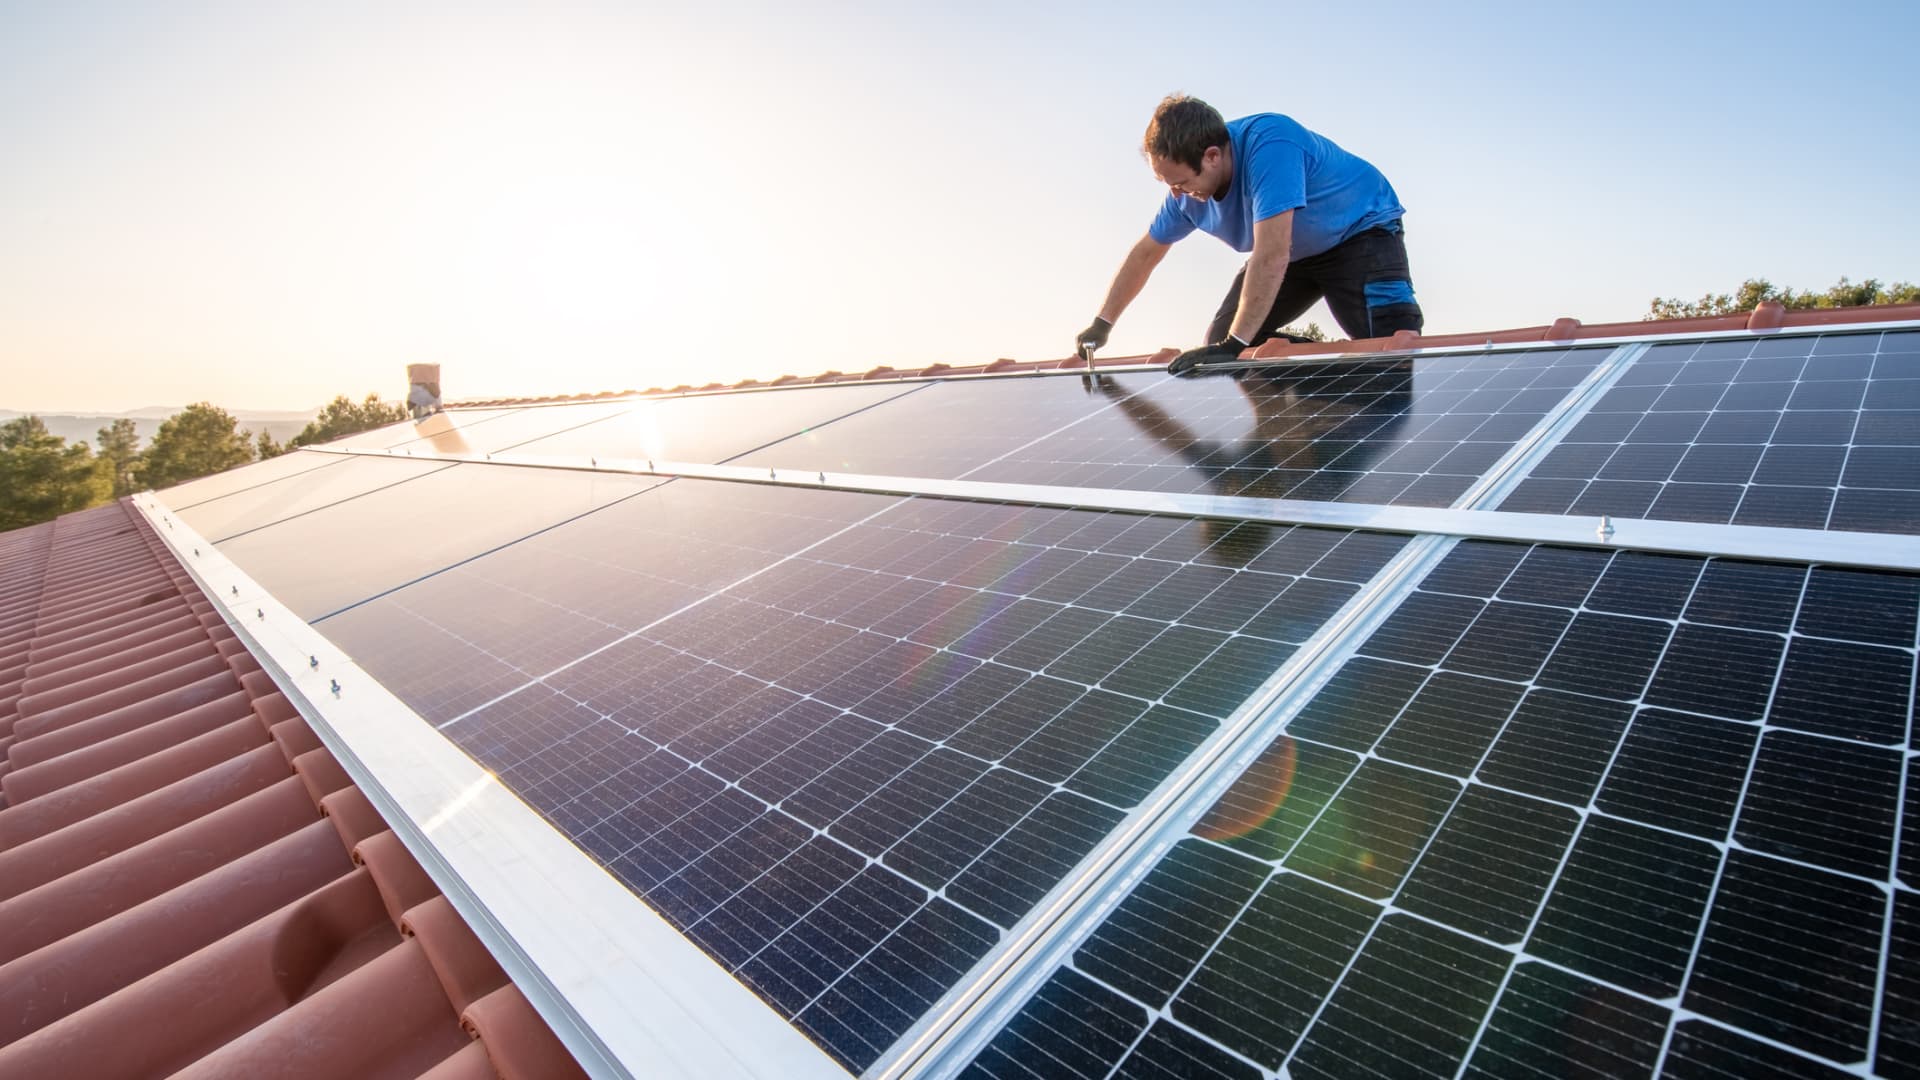 All the top-performing stocks this year are oil and gas except one: solar company Enphase